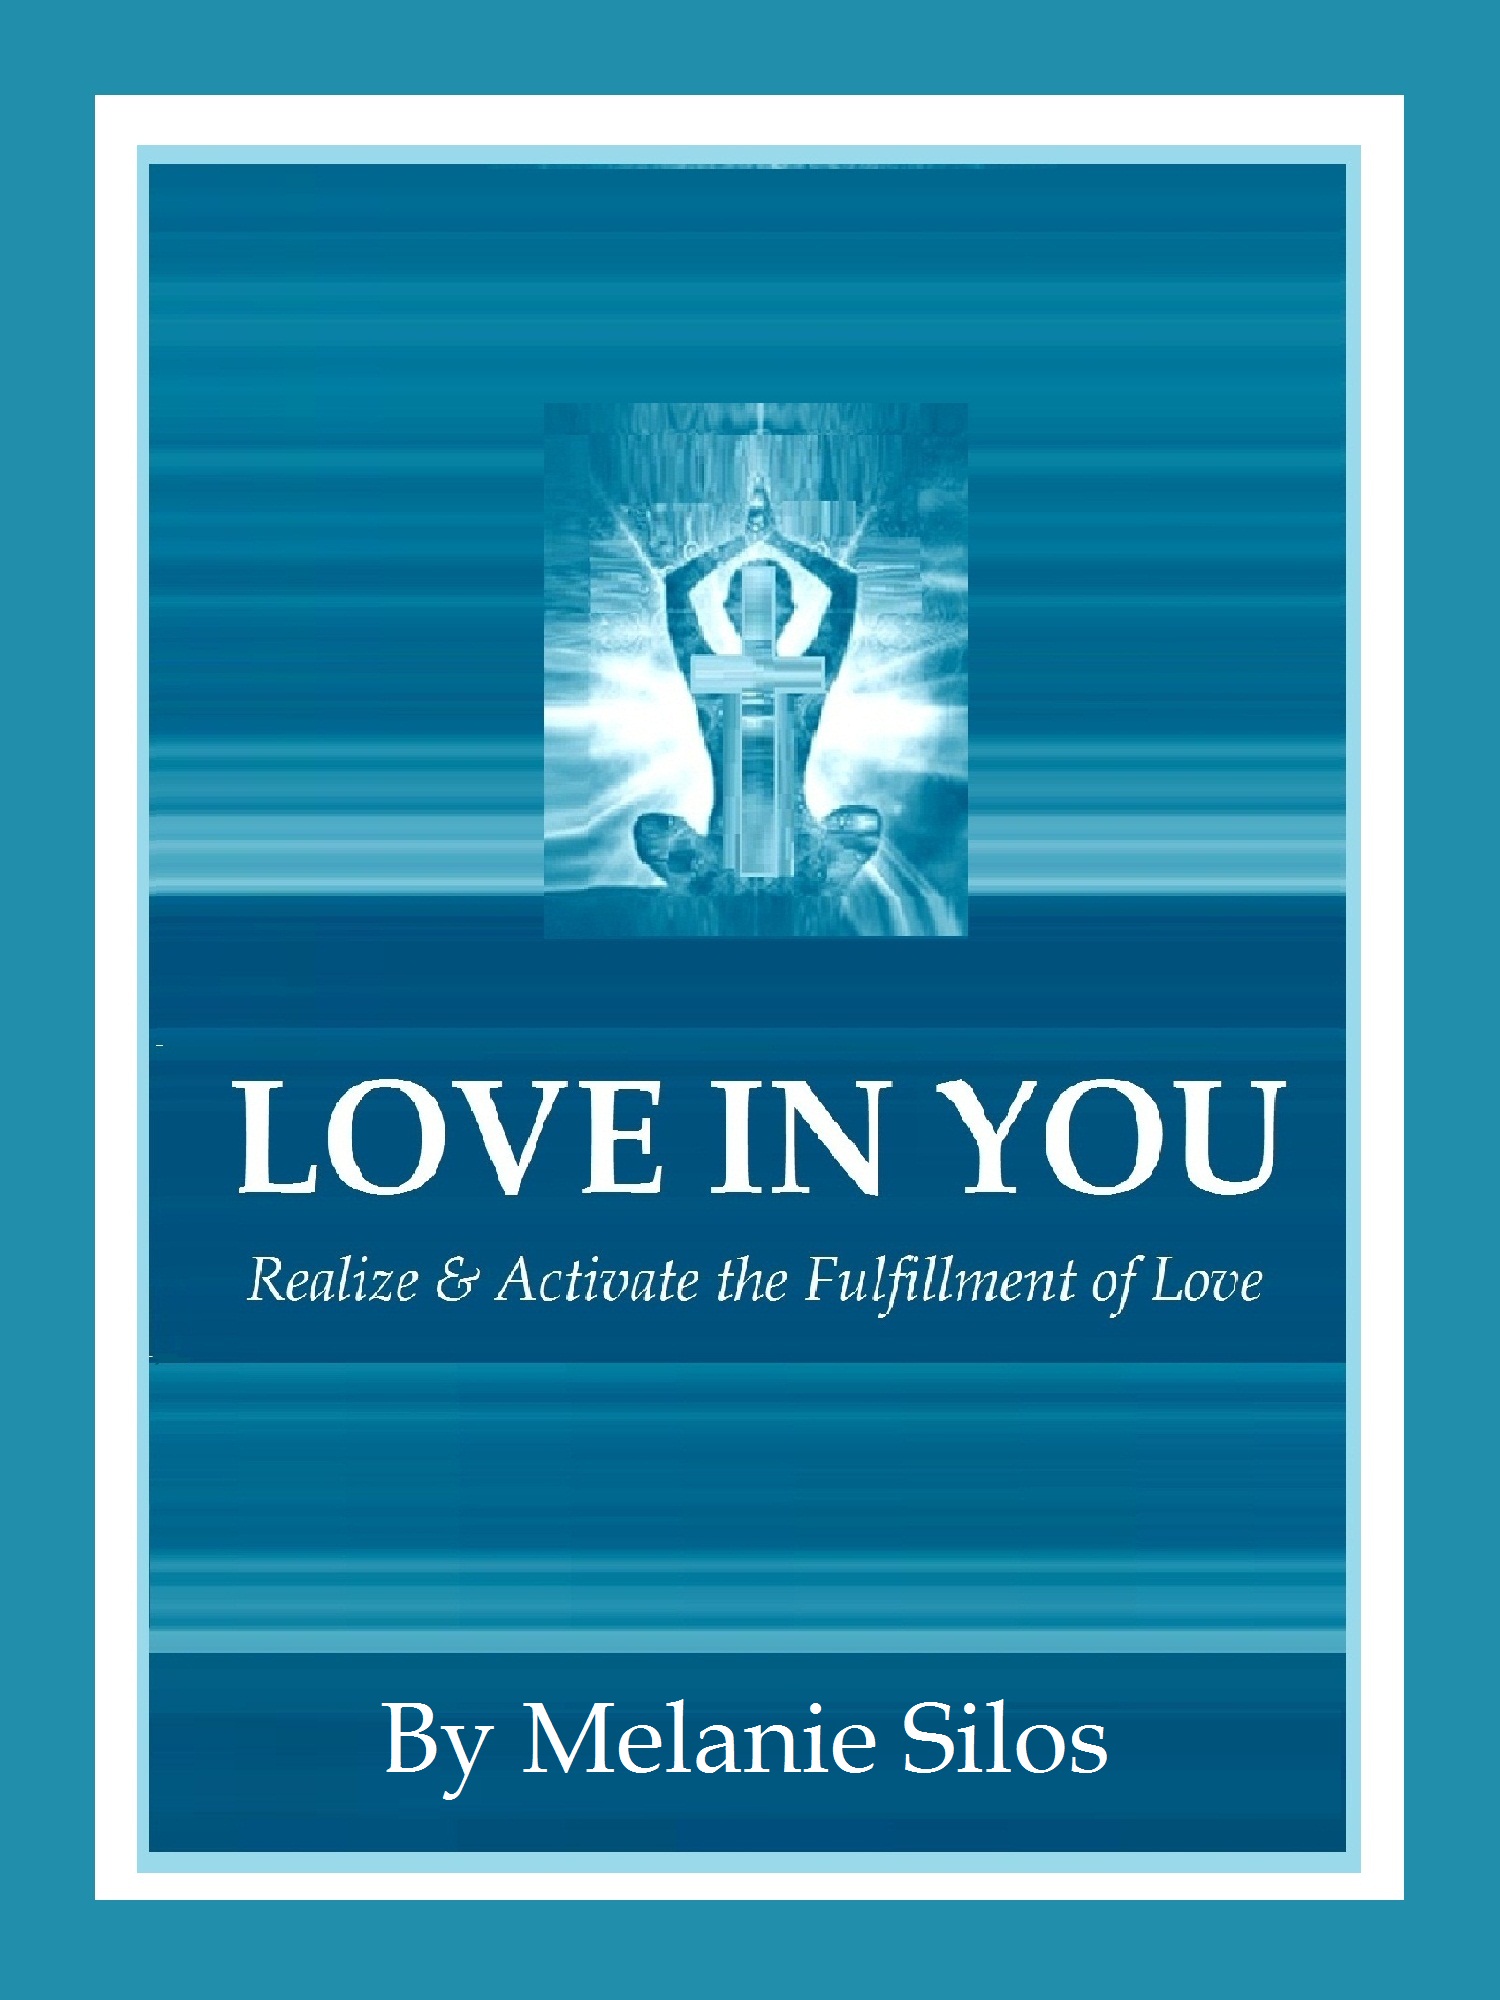 Love in You - Realize & Activate the Fulfillment of Love  - ebook by Melanie Silos